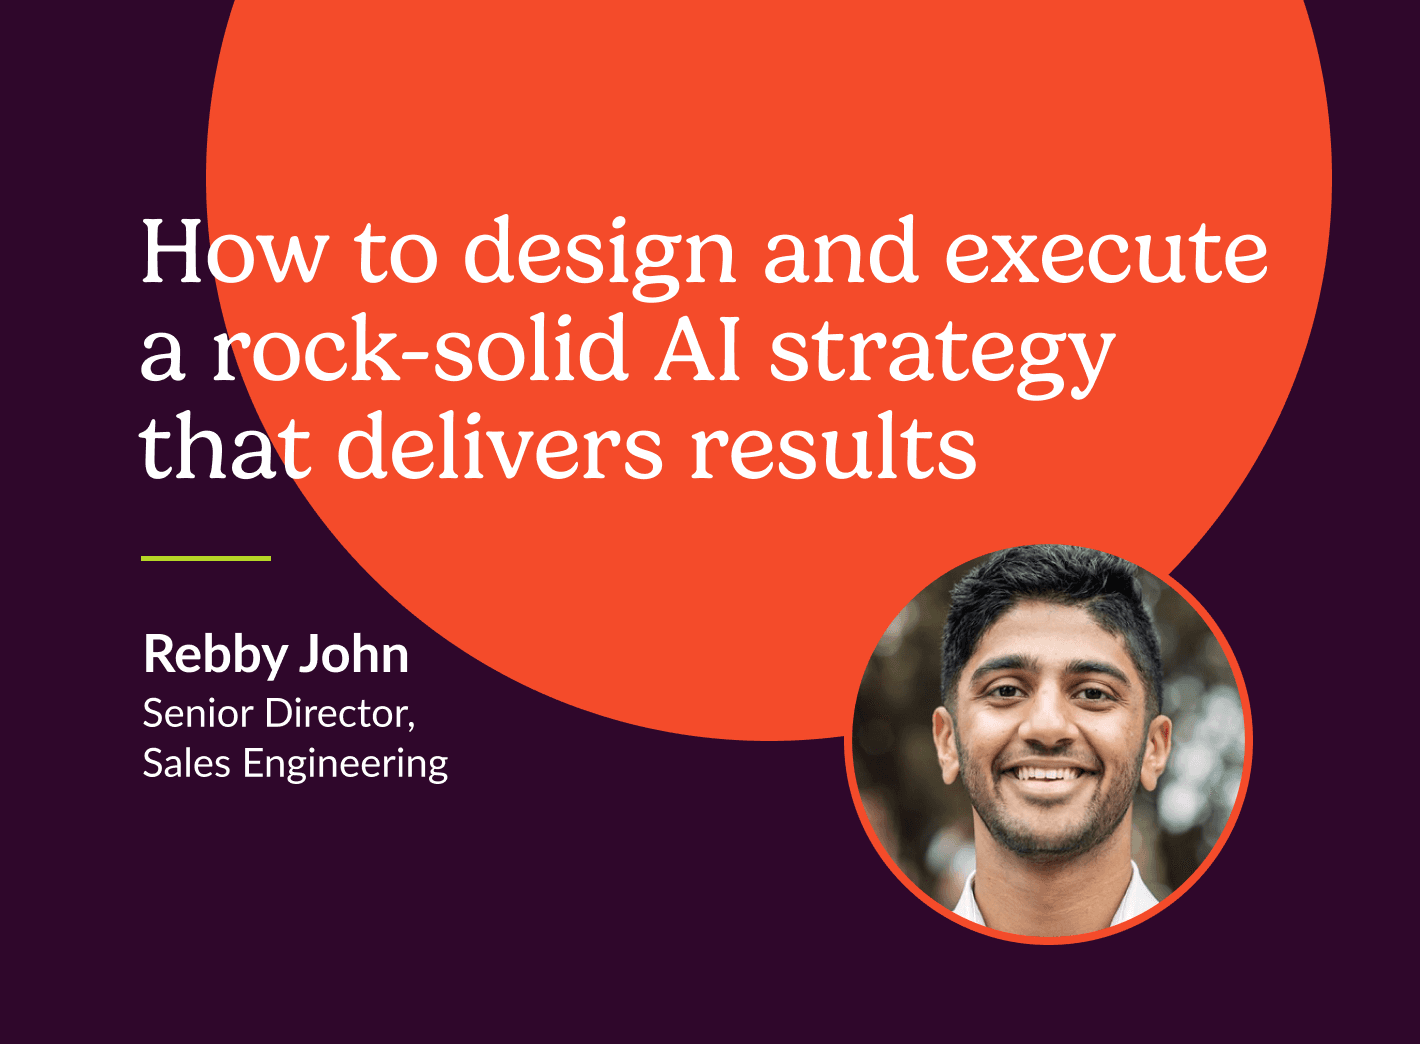 "How to design and execute a rock-solid AI strategy that delivers results"